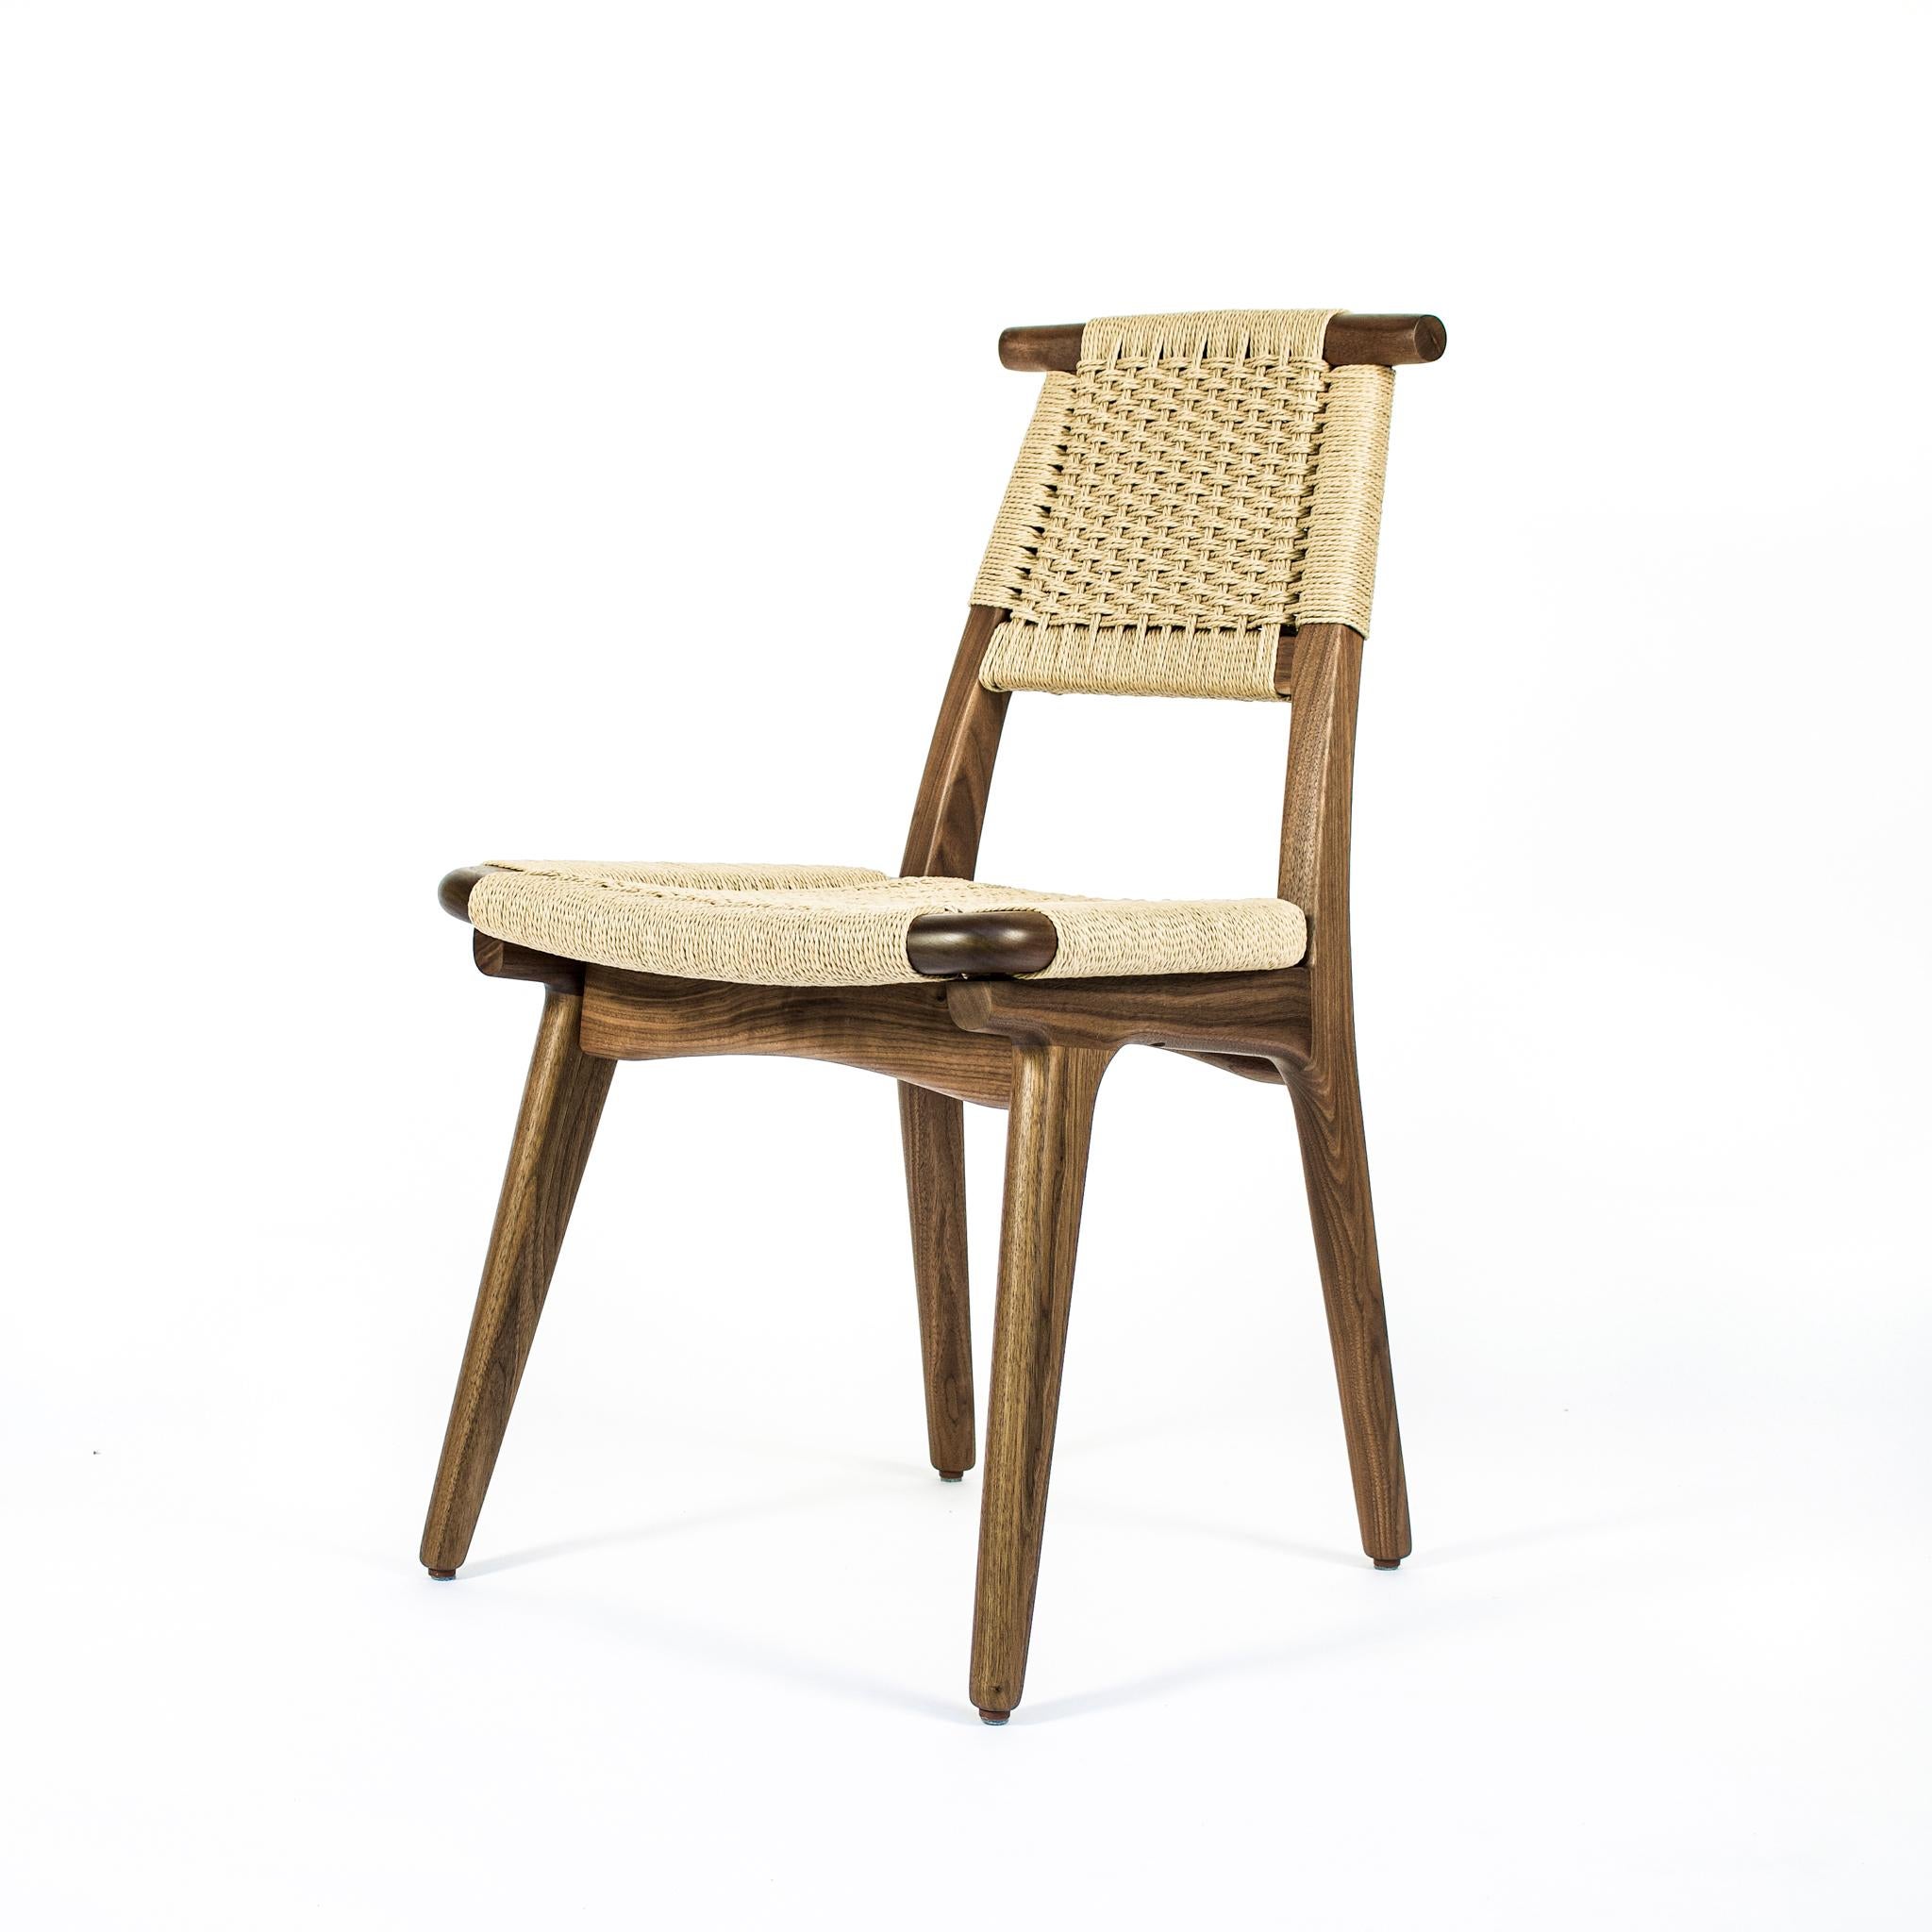 Chair, Woven Danish Cord, Hardwood, Walnut, Midcentury, Dining, Office, Custom In New Condition For Sale In Issaquah, WA